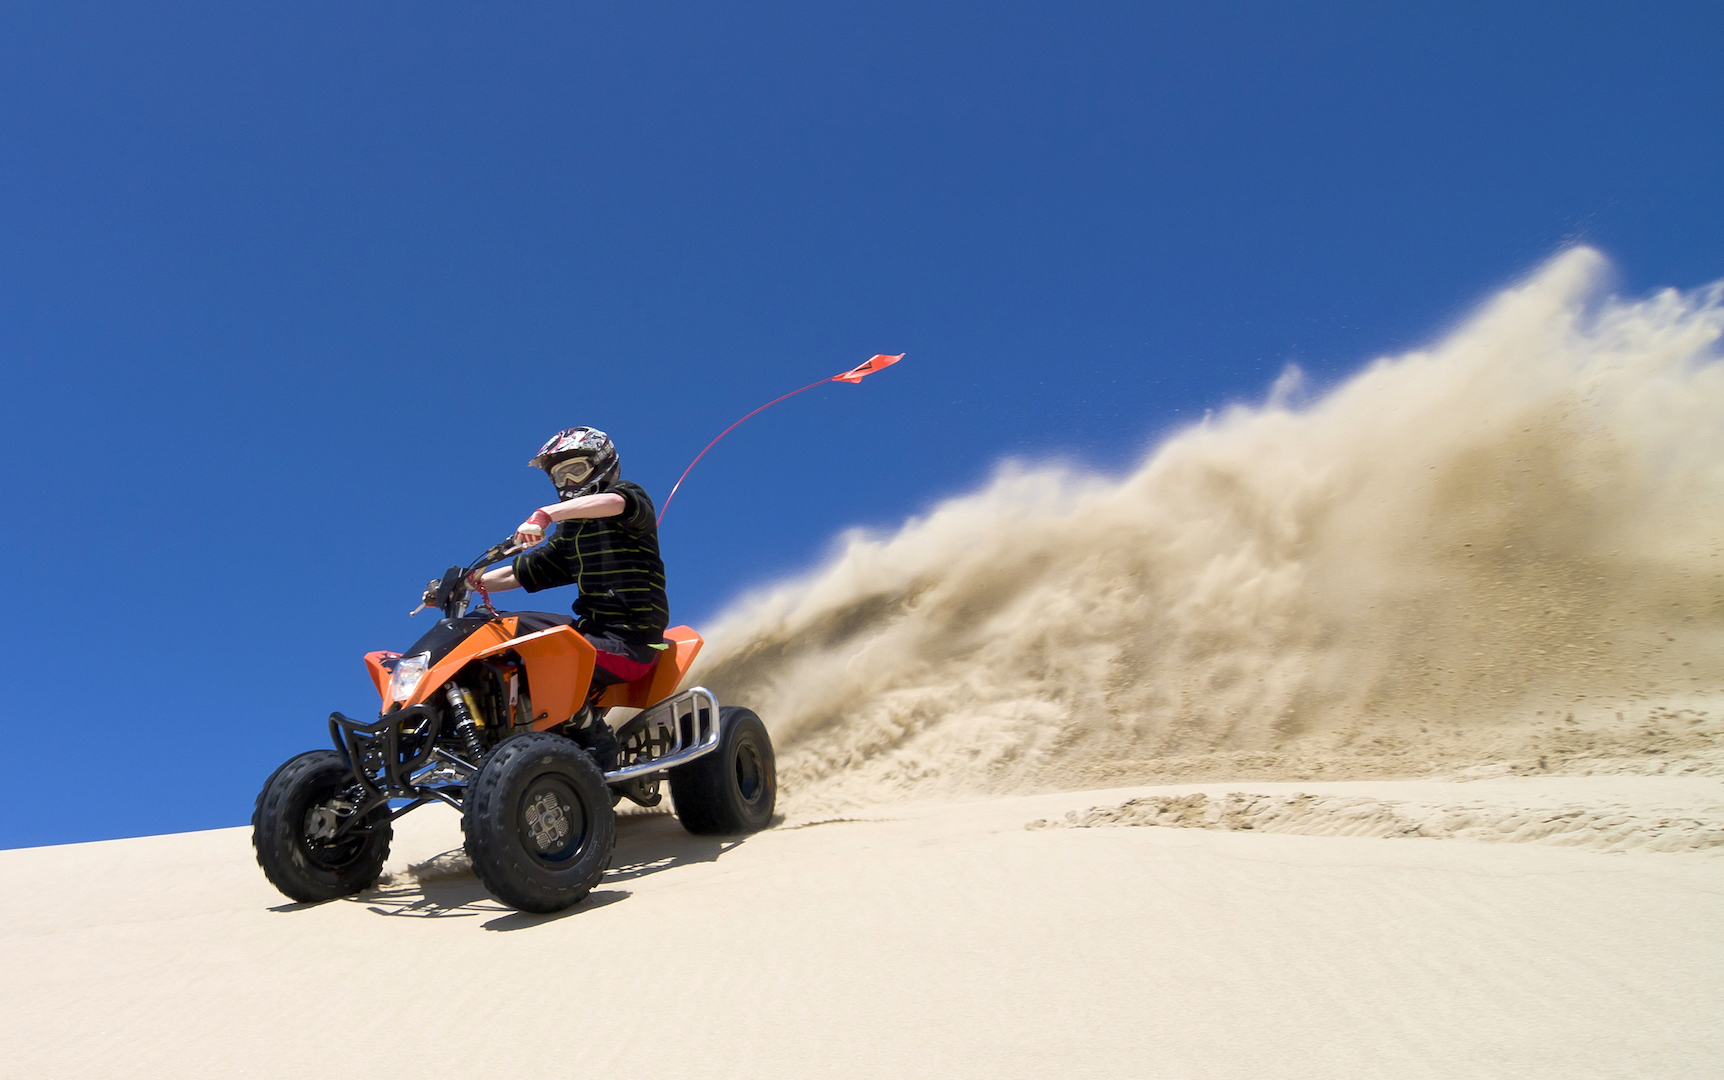 Experience the Dunes